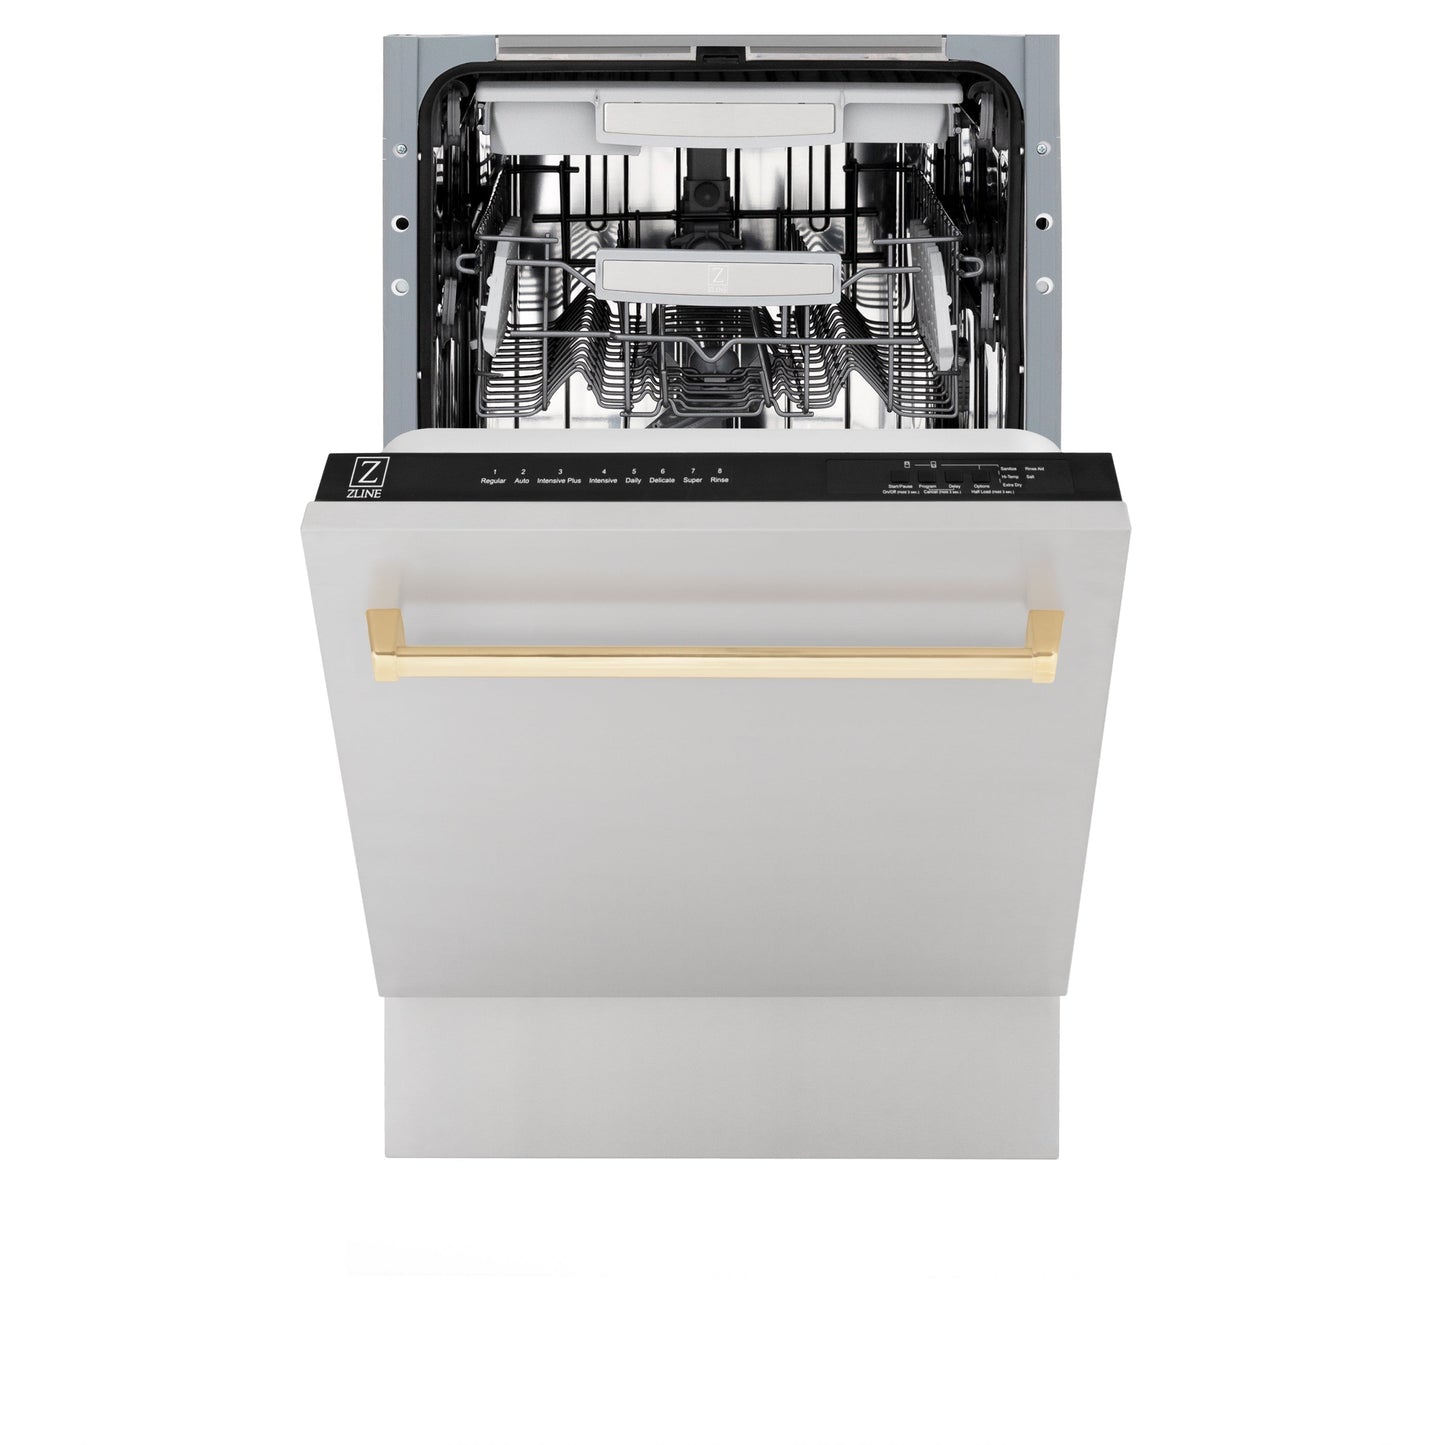 ZLINE Autograph Edition 18” Compact 3rd Rack Top Control Dishwasher in Stainless Steel with Polished Gold Handle, 51dBa (DWVZ-304-18-G)